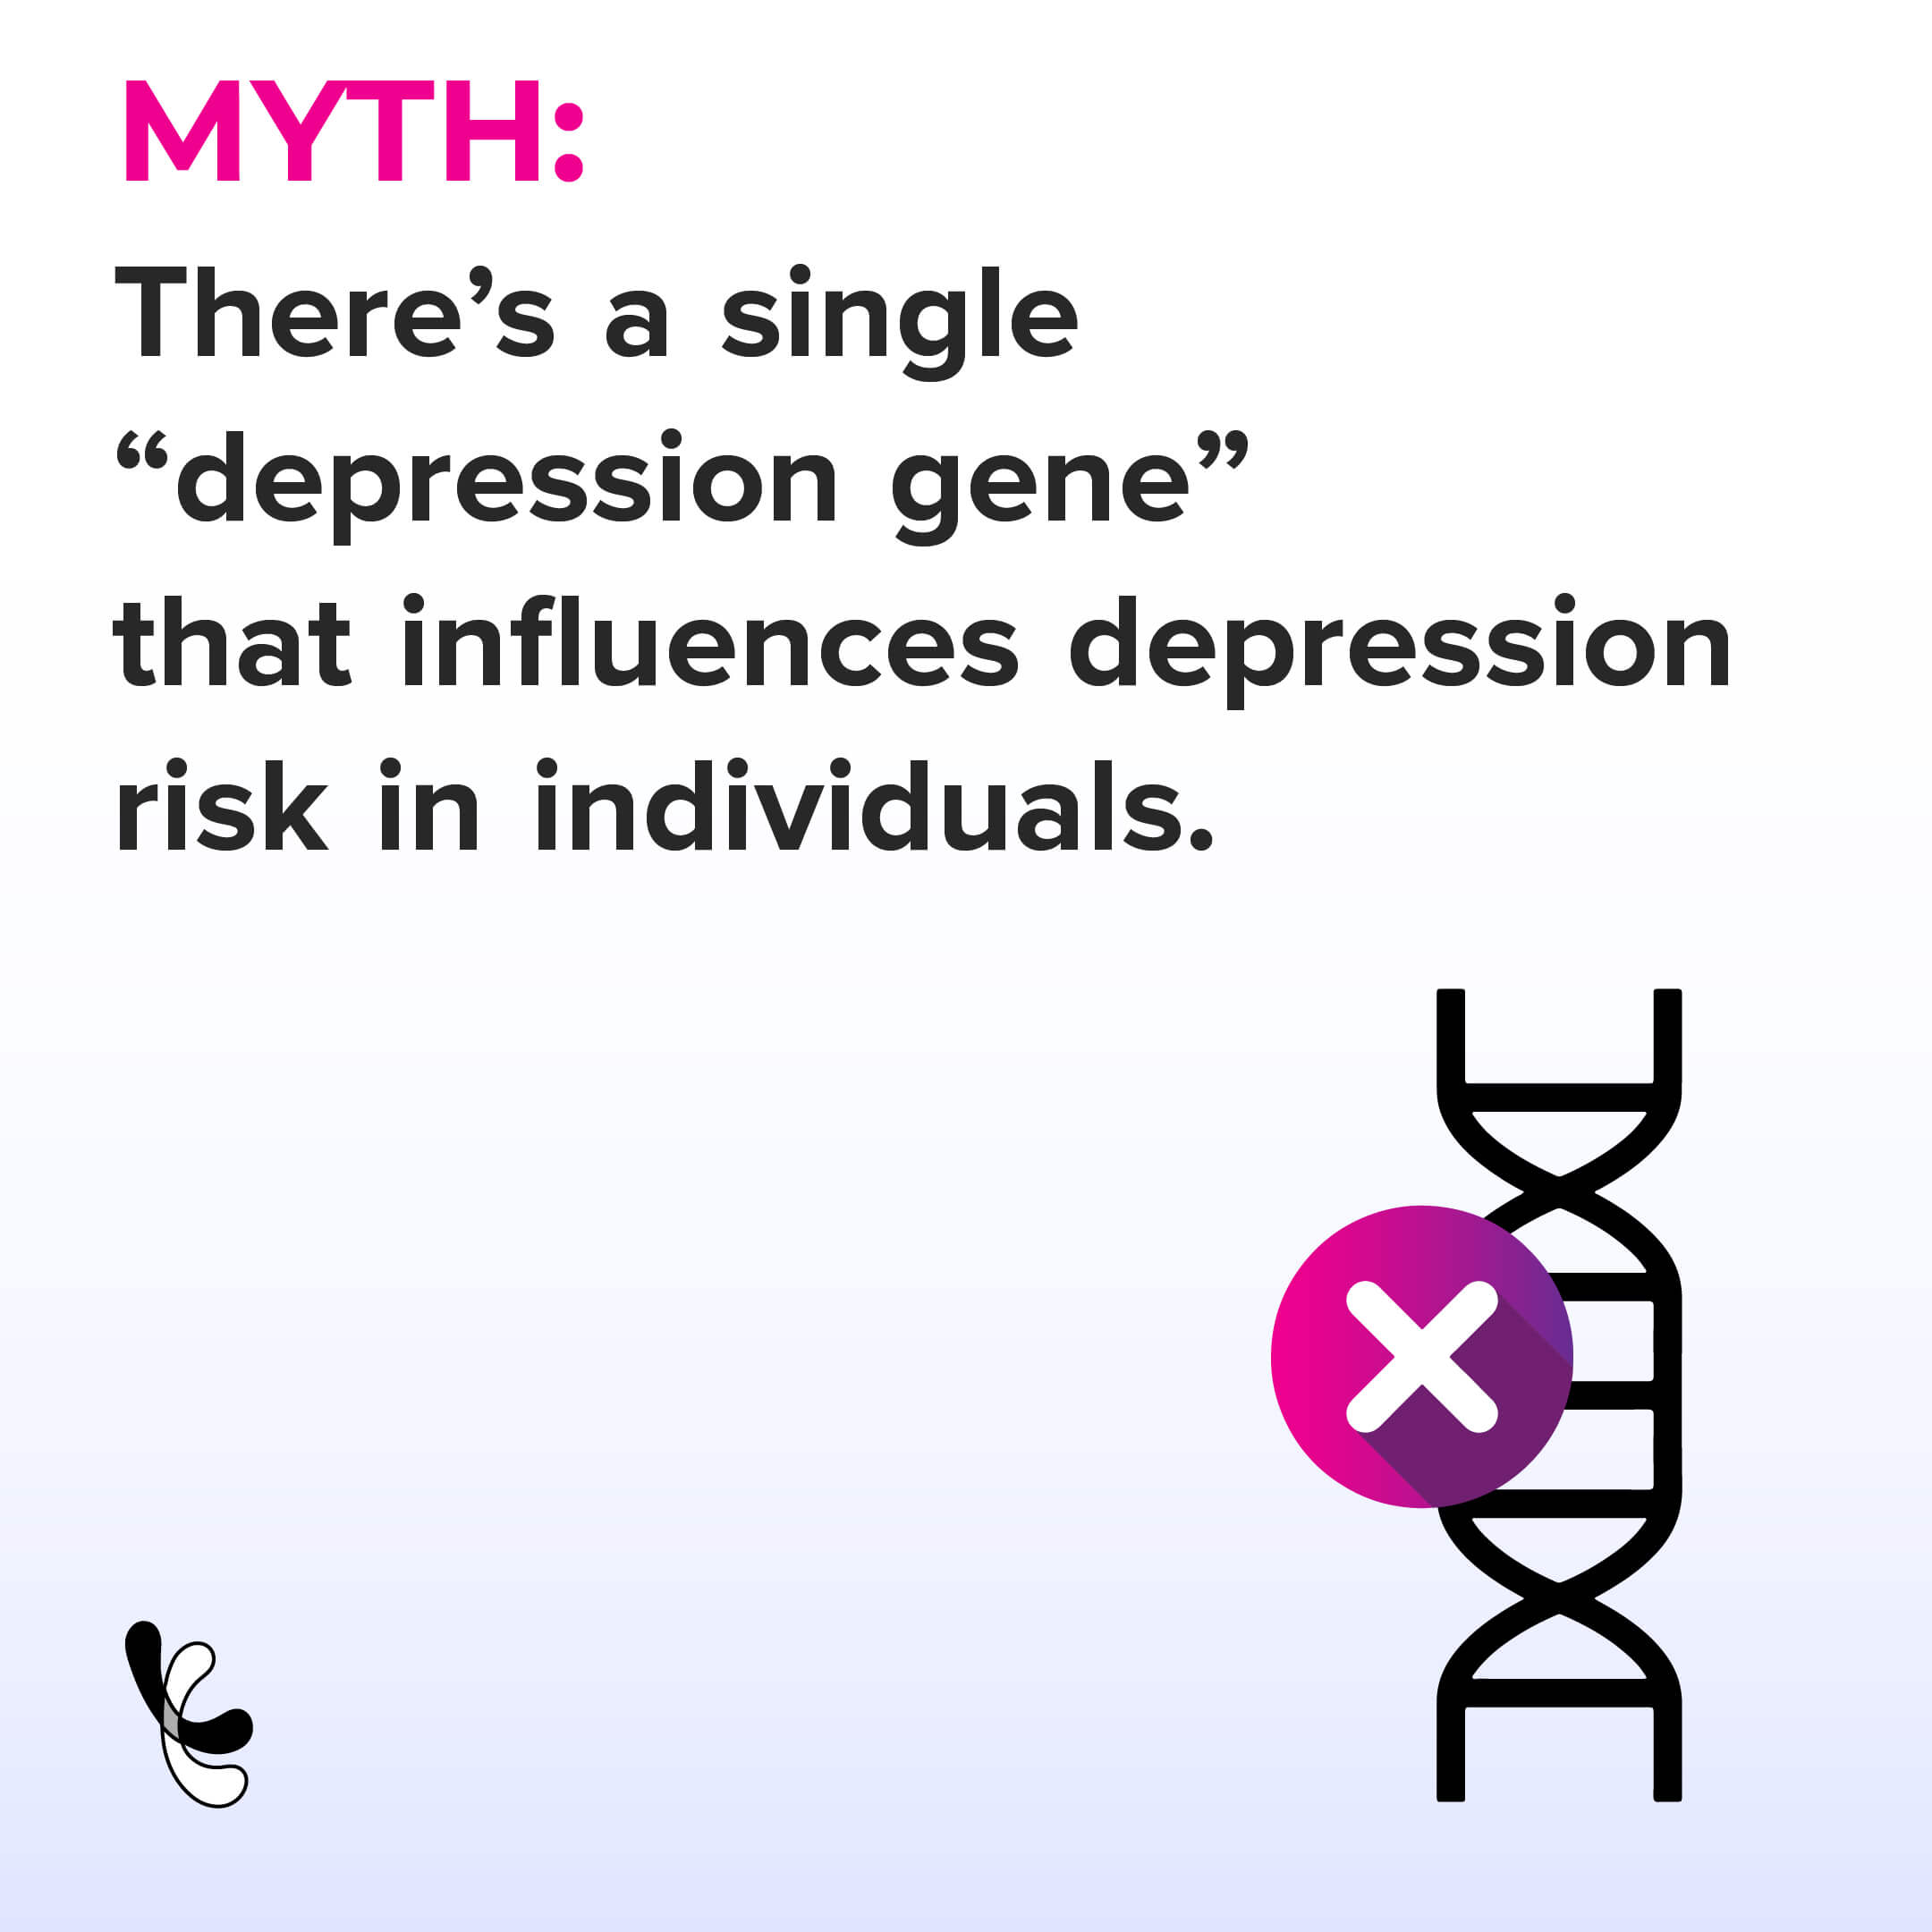 Myth about depression with a DNA strand icon